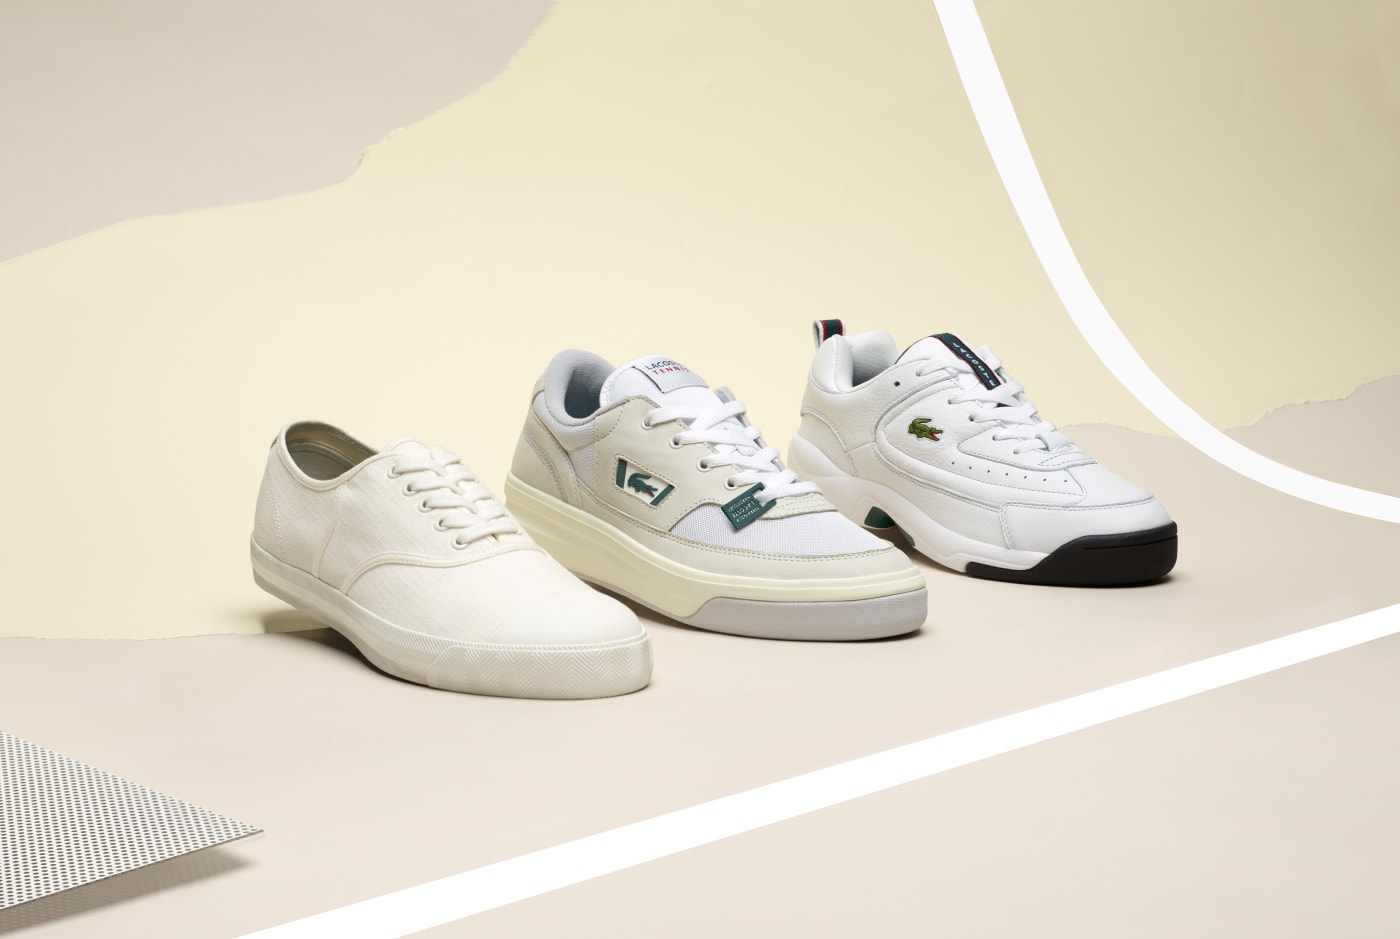 LACOSTE's Heritage Collection Reissues 